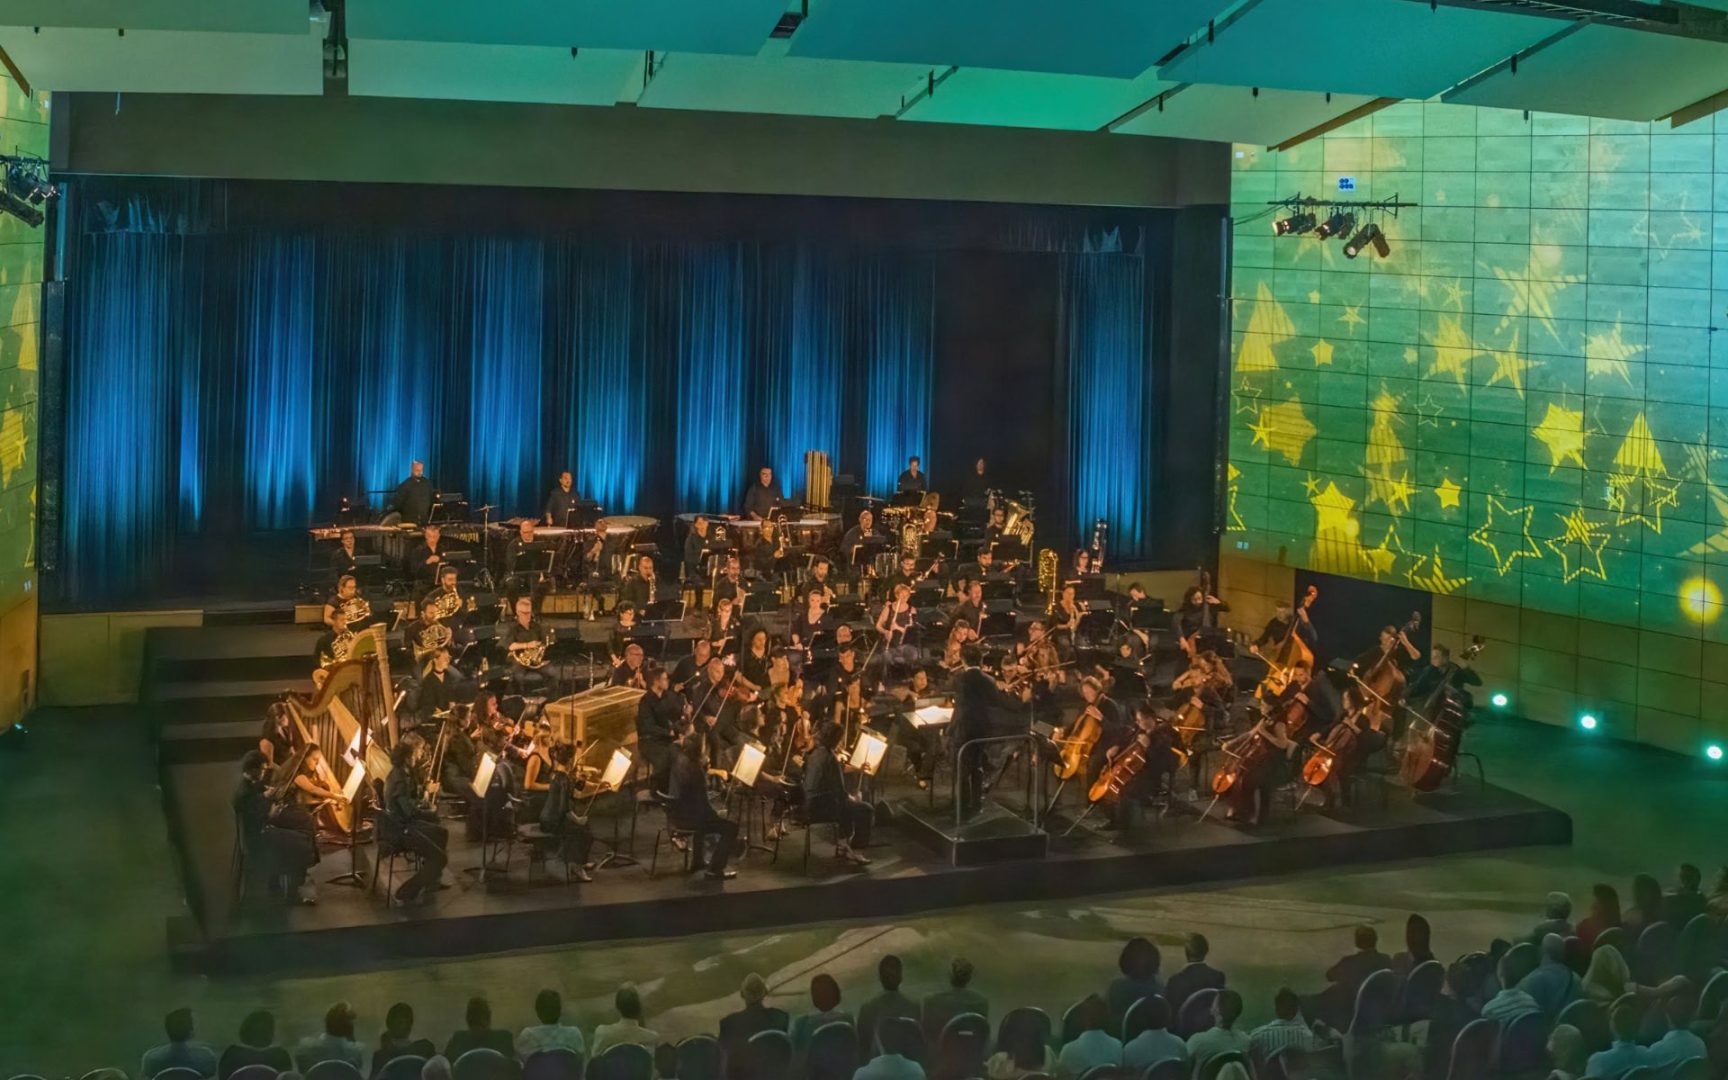 Classical music is delivered in a multisensory experience by the Malta Philharmonic Orchestra